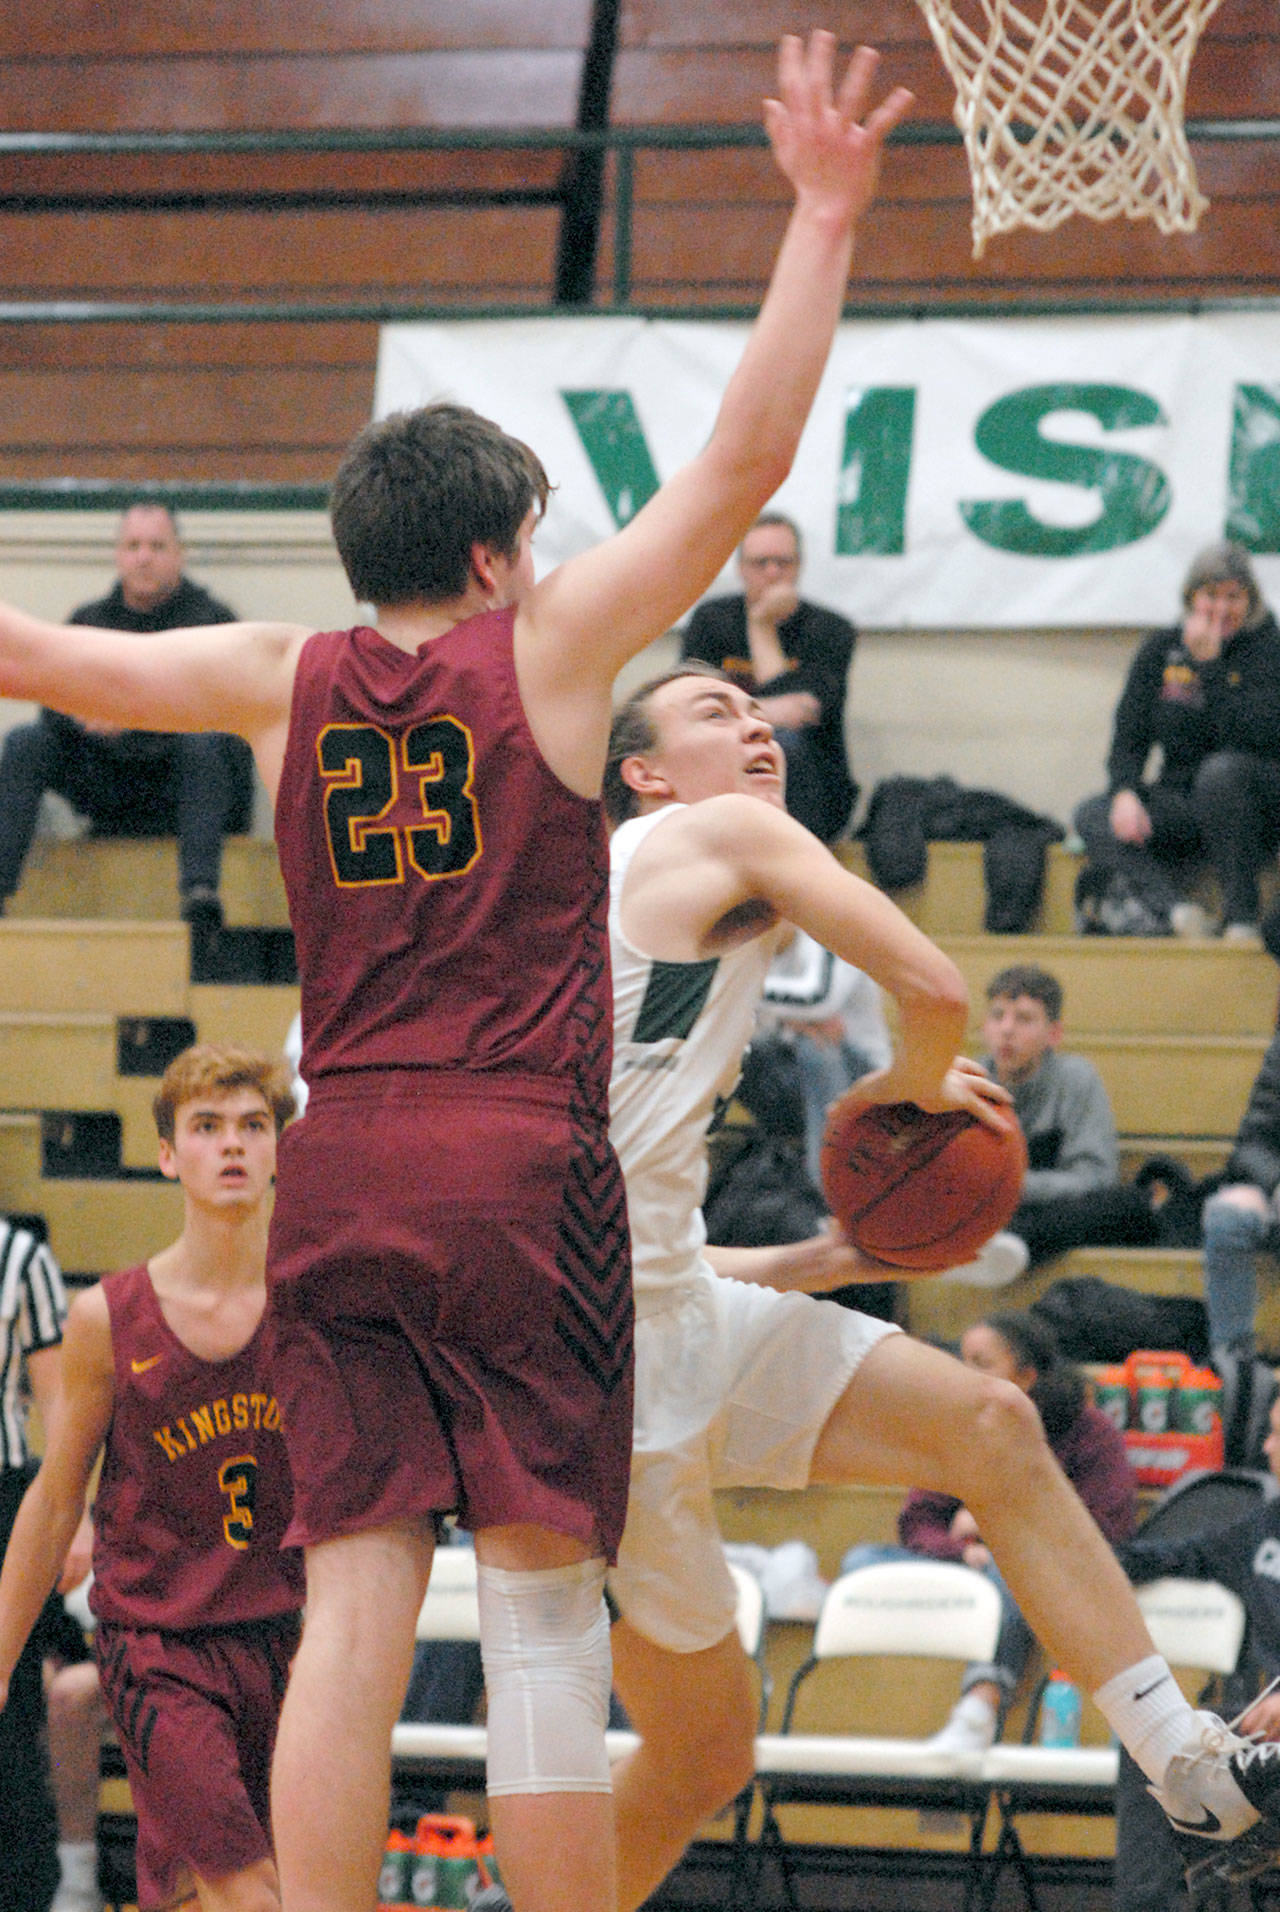 Port Angeles’ Derek Bowechop, right, sets for a layup while defended by Kingston’s Dylan Baze on Wednesday at Port Angeles High School. (Keith Thorpe/Peninsula Daily News)